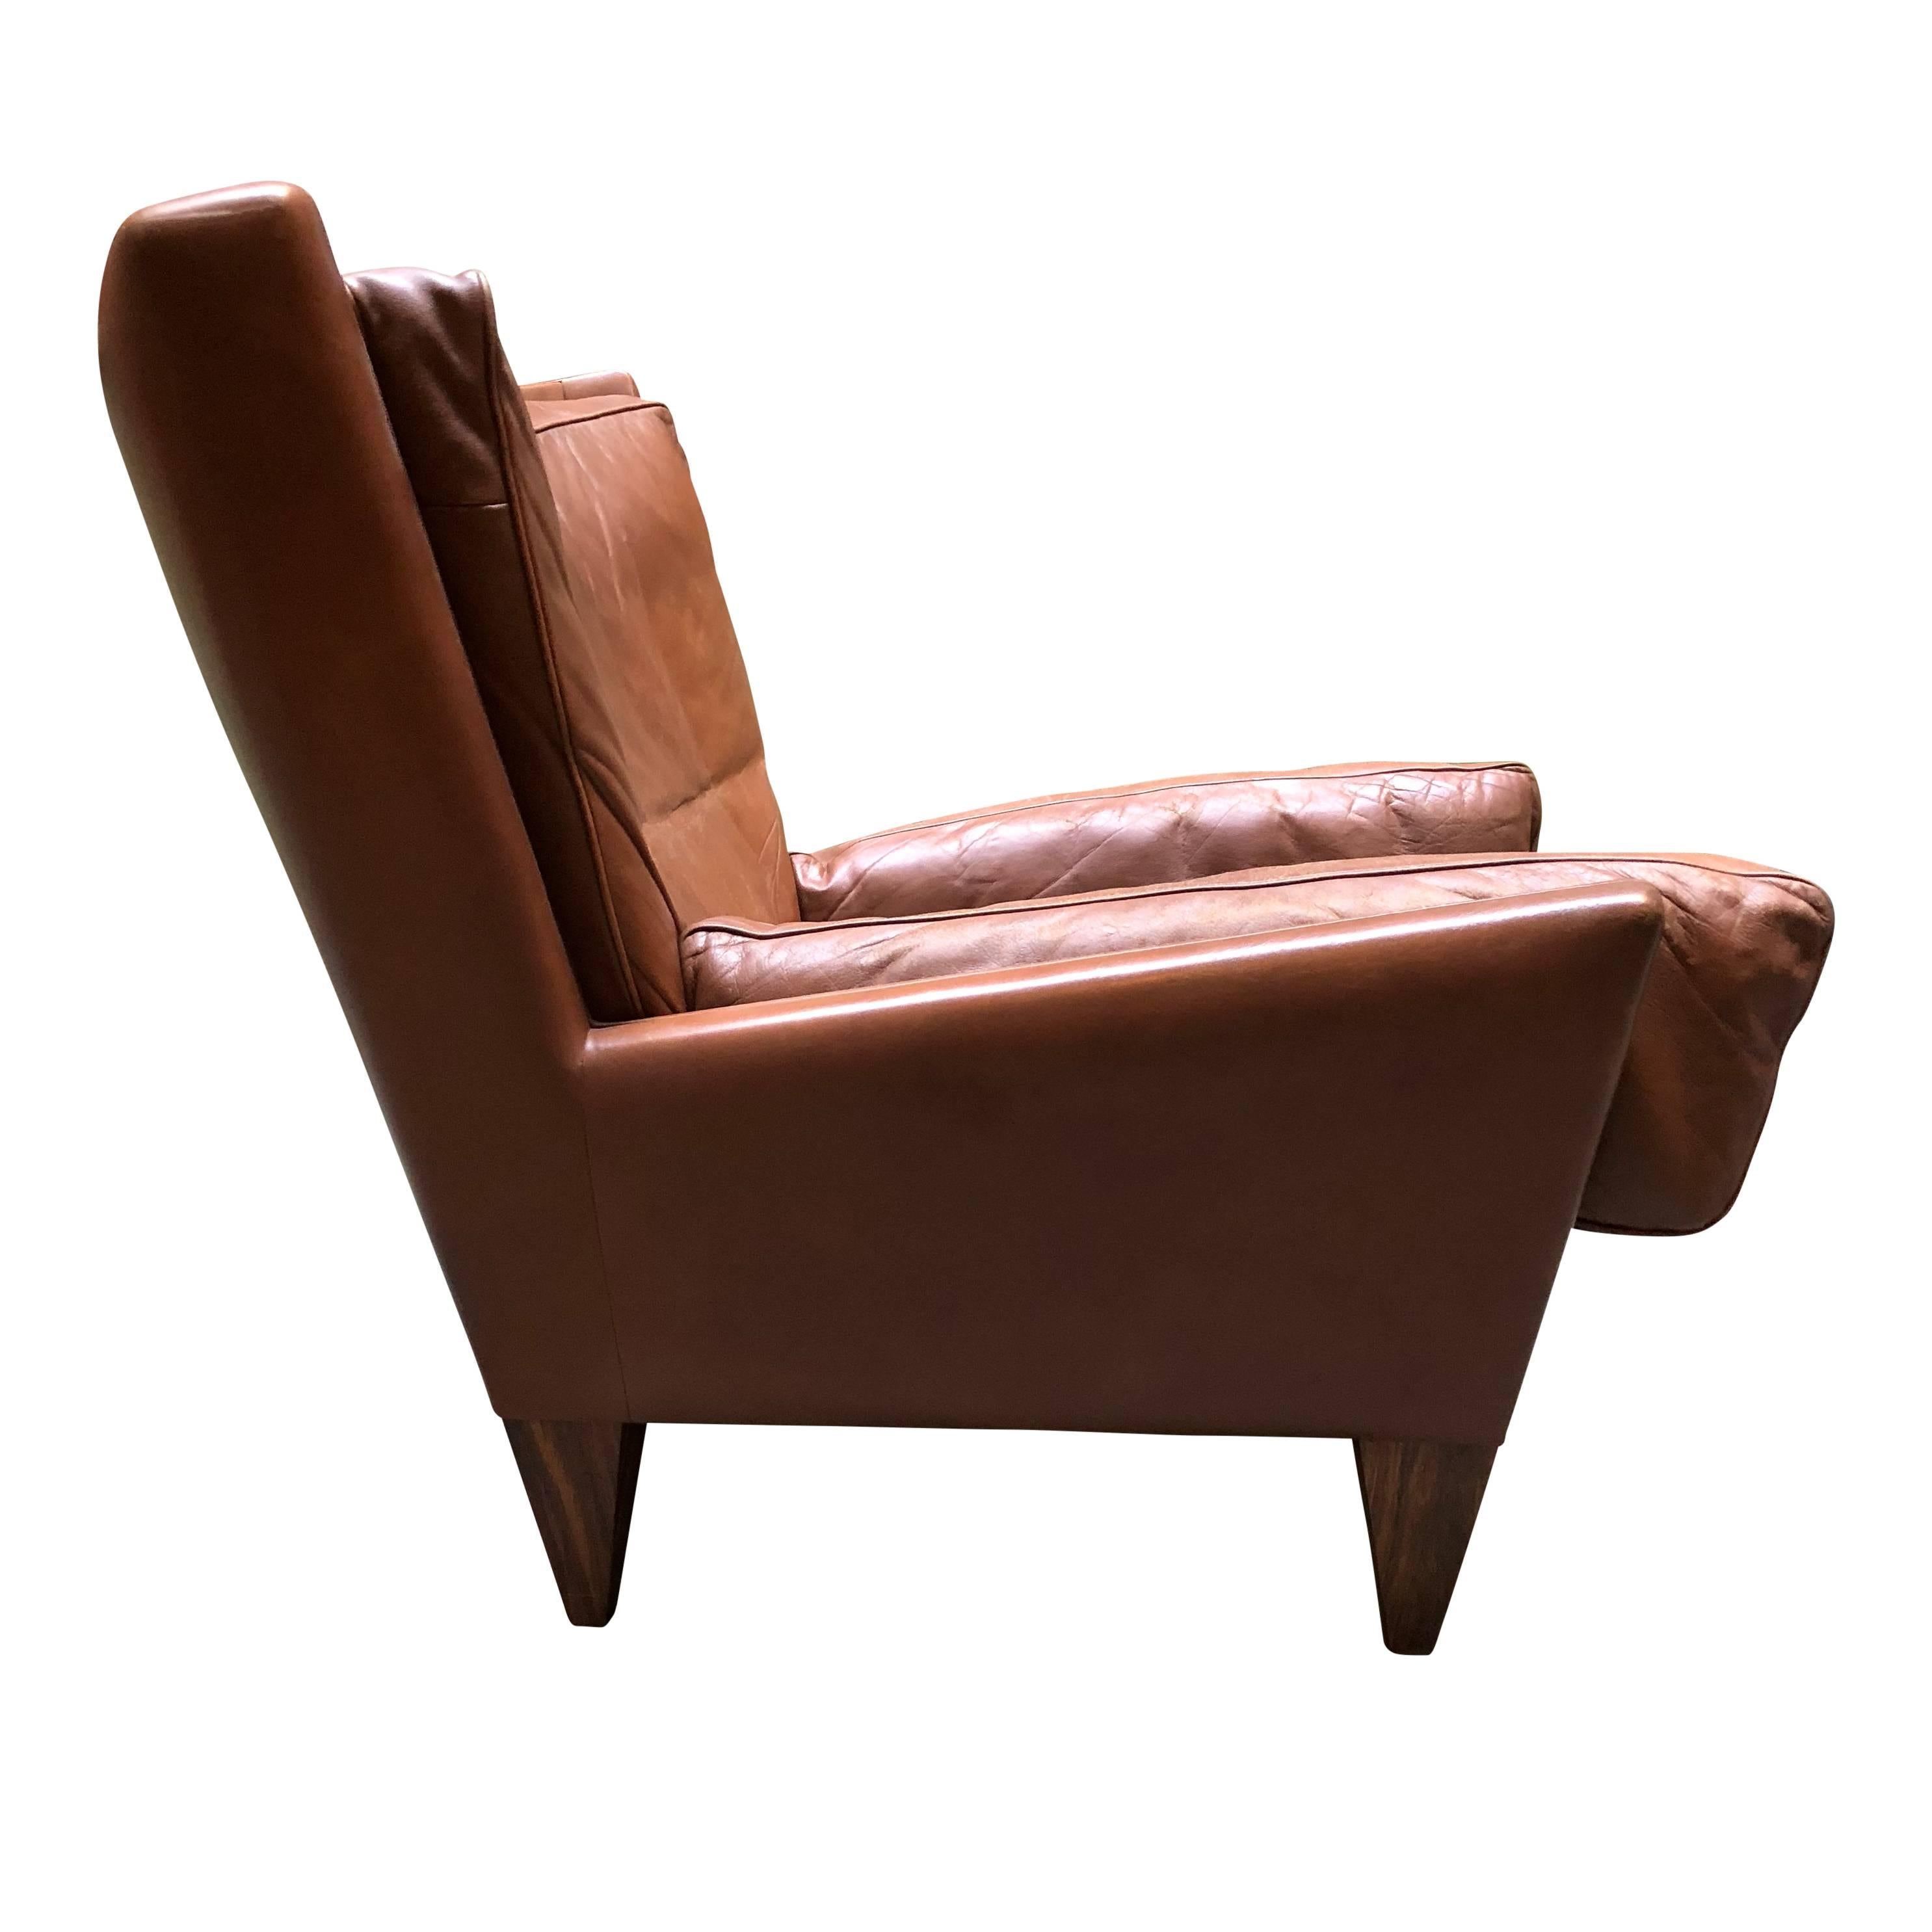 For your consideration is a rare Illum Wikkelso V11 pyramid lounge chair in supple brown leather for Holger Christiansen. 

This rare char is a cozy addition to any abode. The down-filled cushions allow you to gracefully relax.

Slight wear to